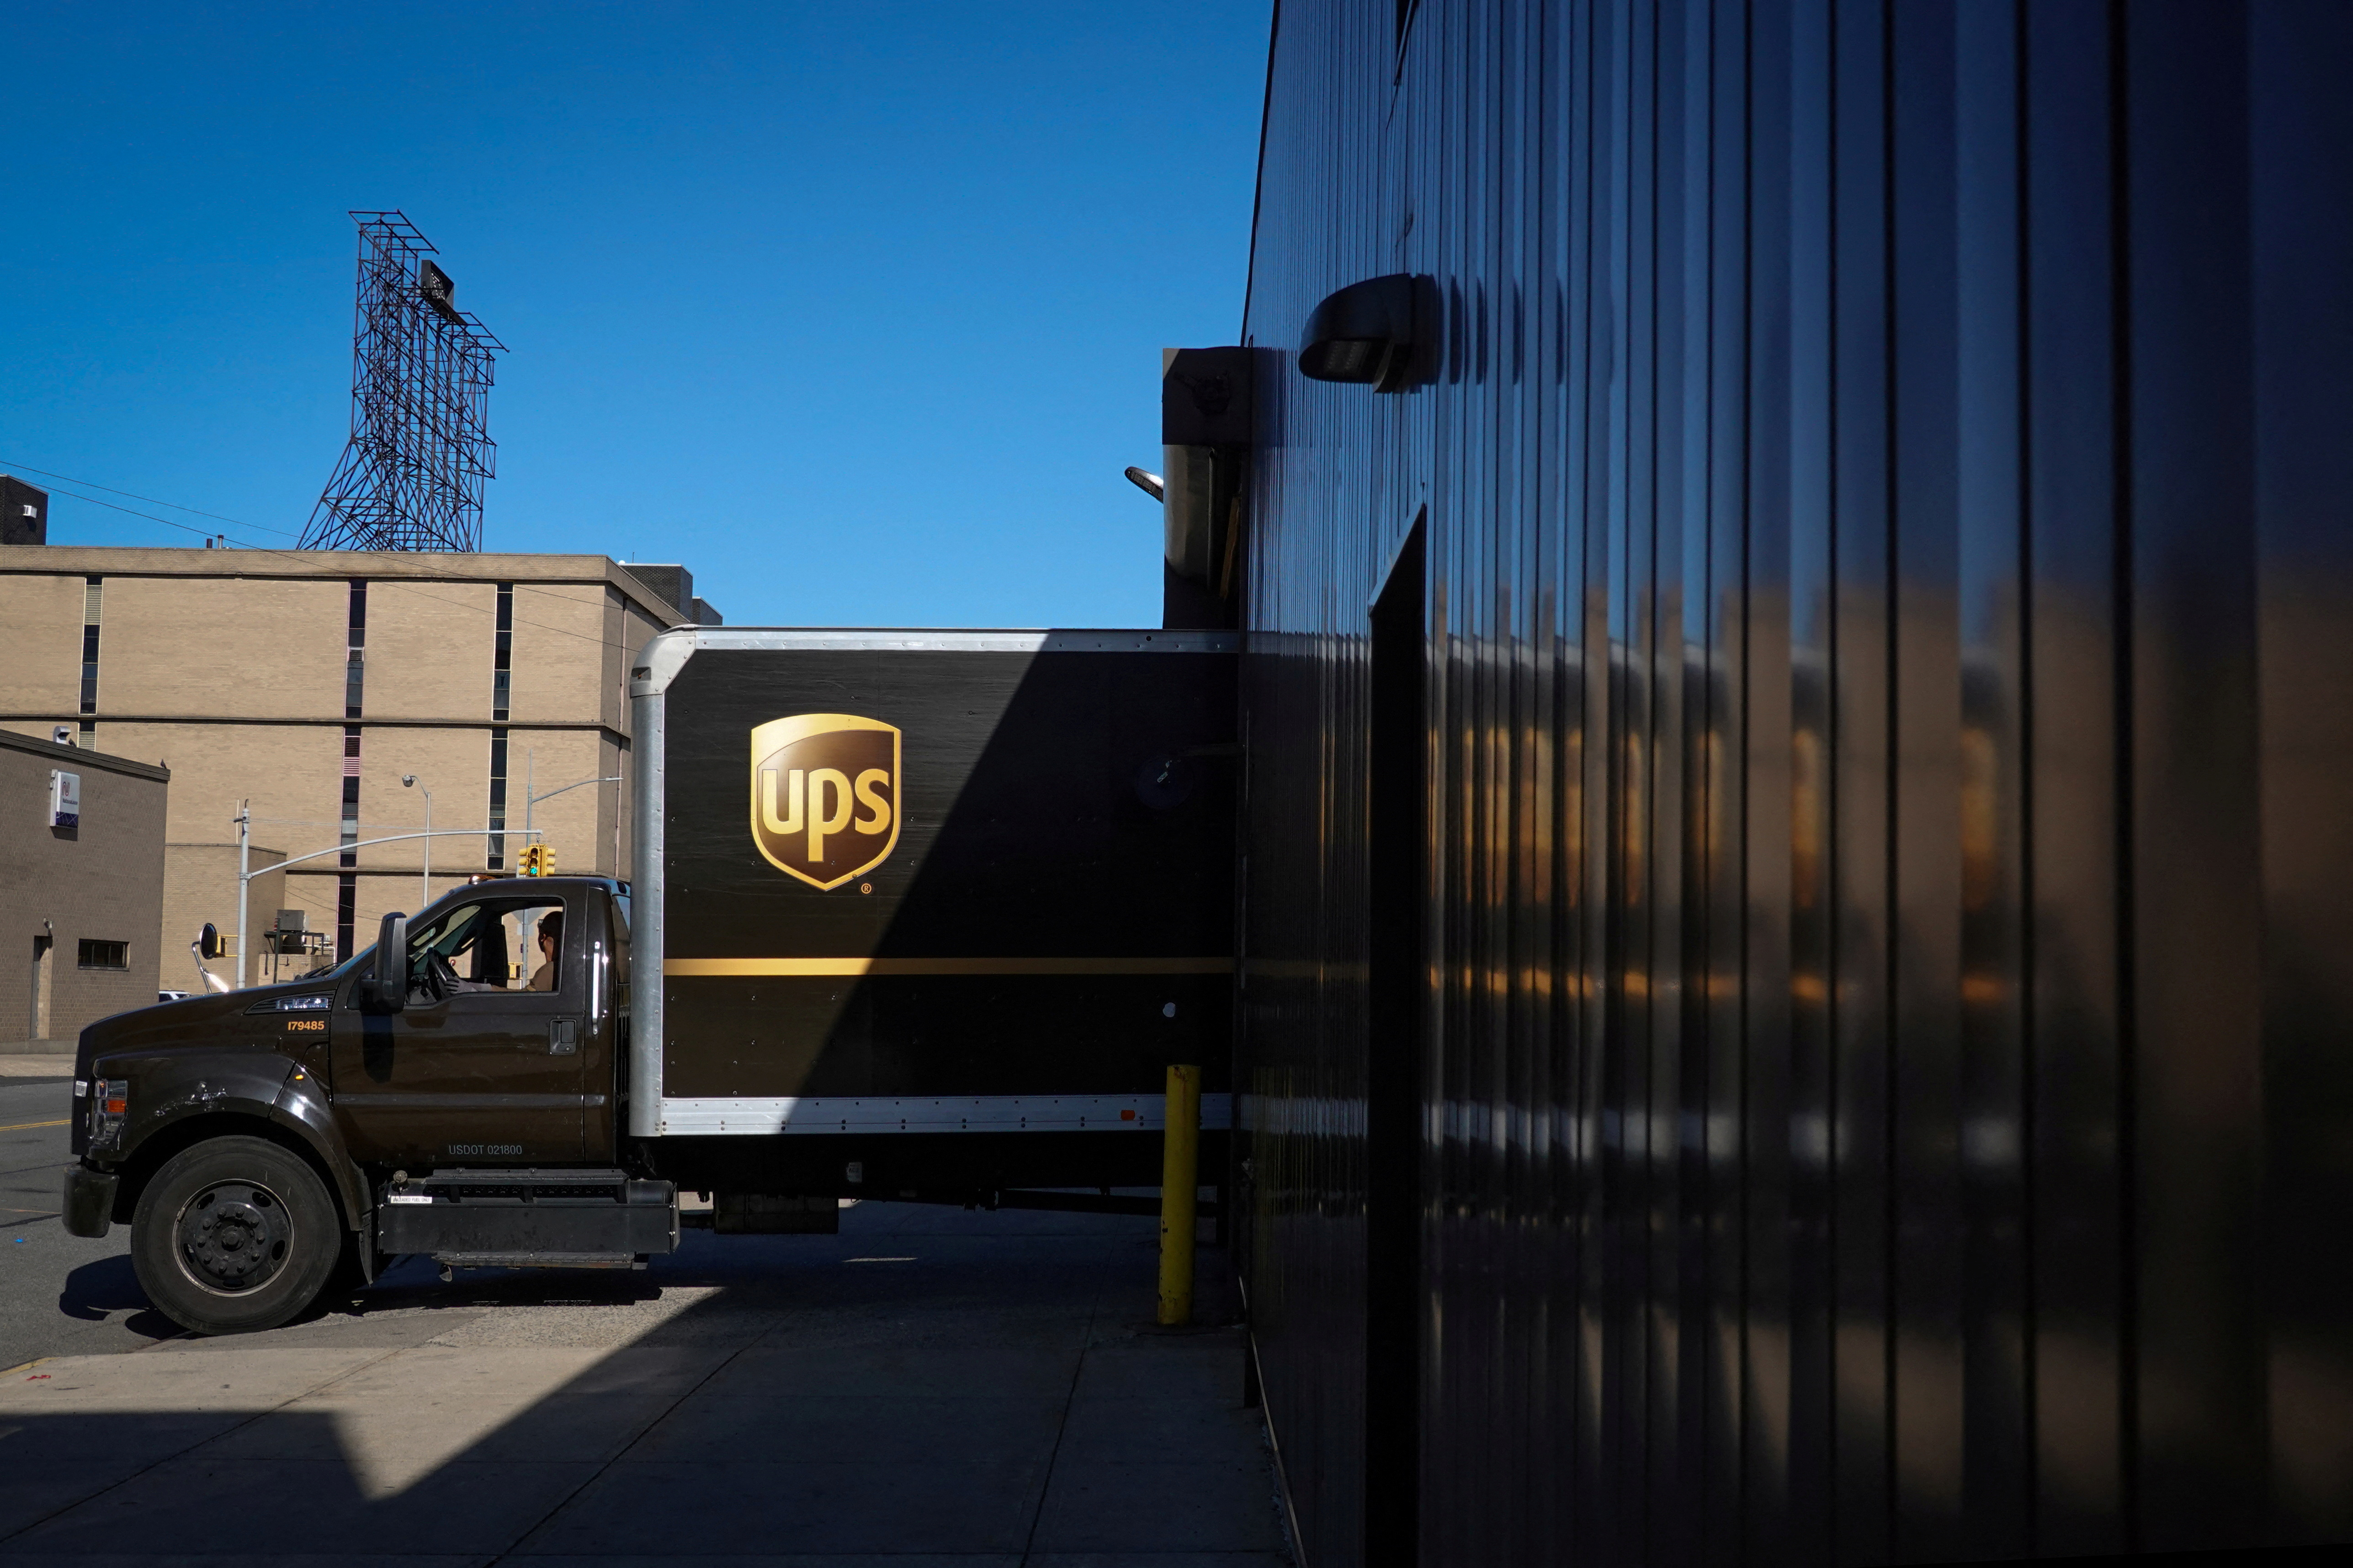 A United Parcel Service (UPS) vehicle reverses into a facility in Queens, New York City